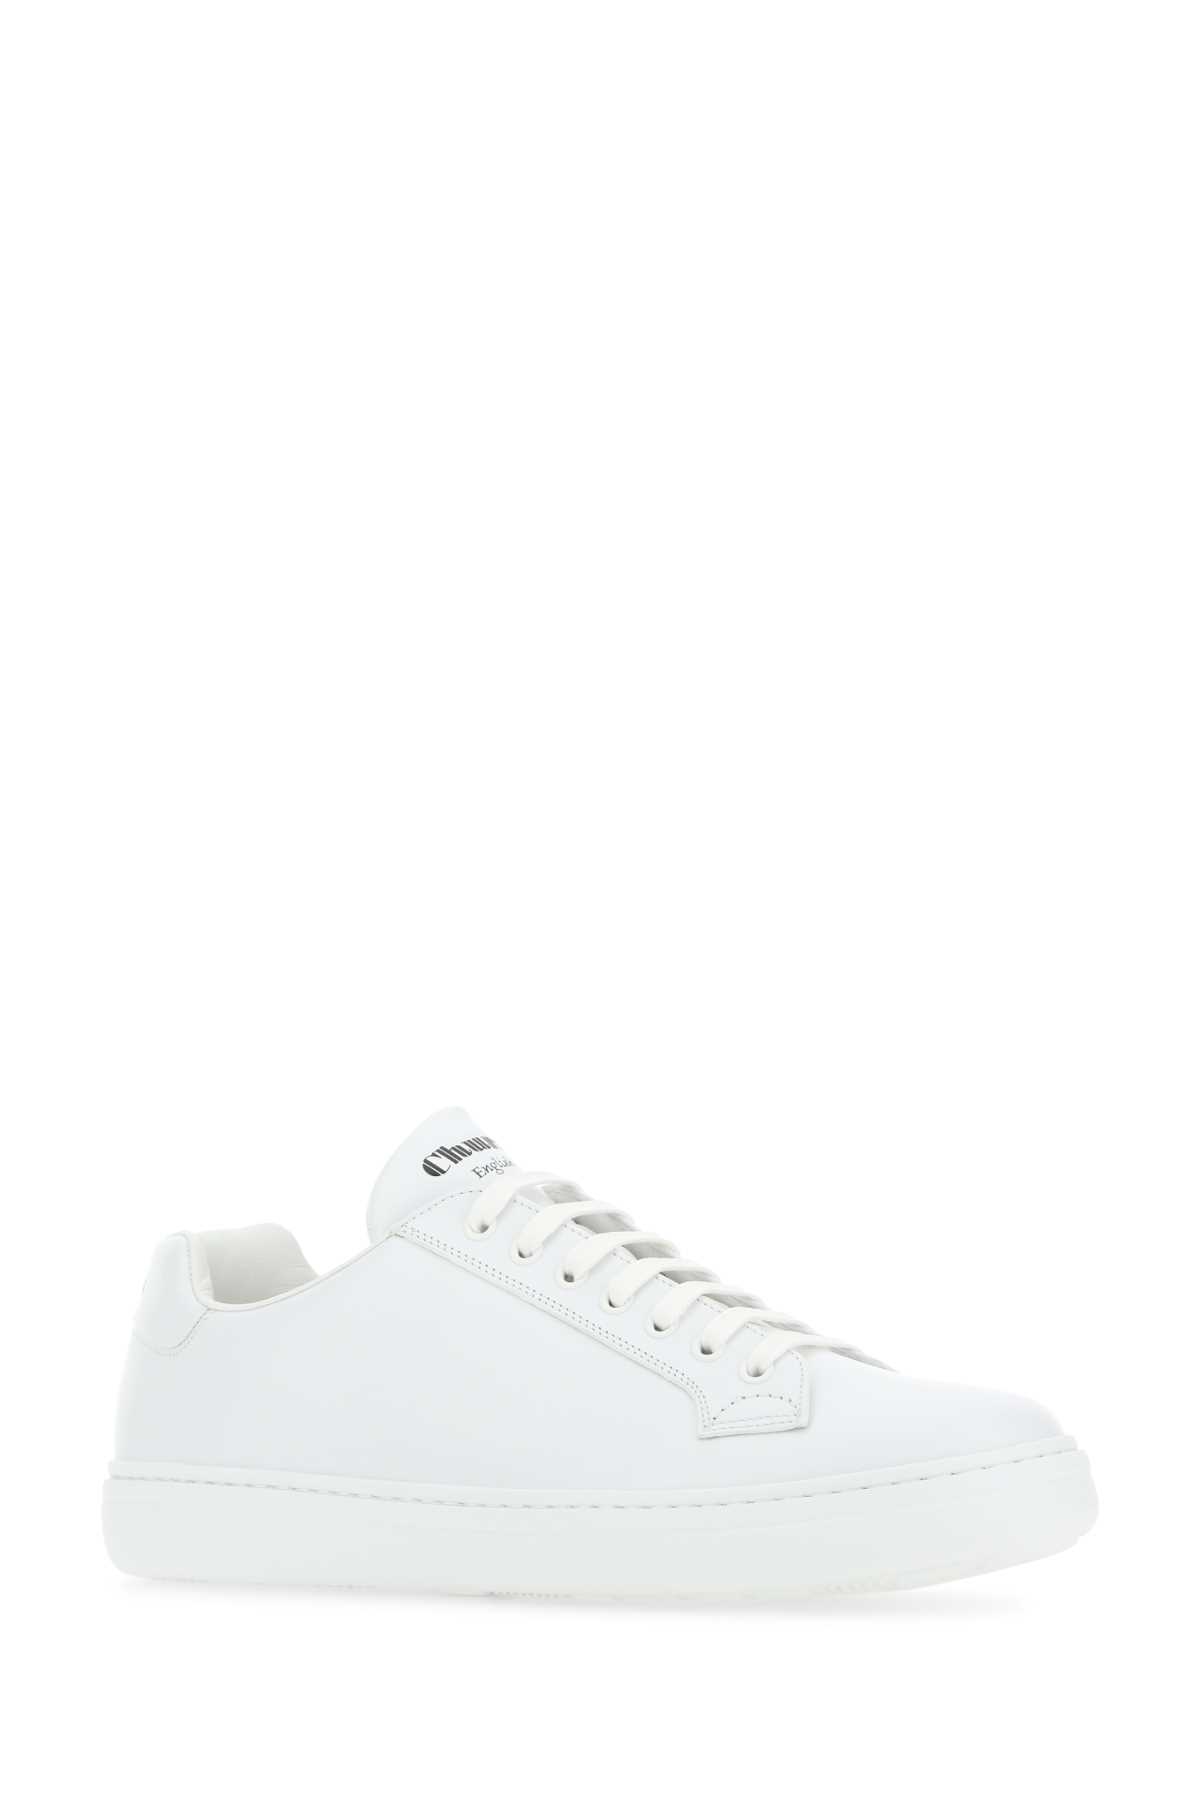 Church's White Leather Boland S Sneakers In F0abk